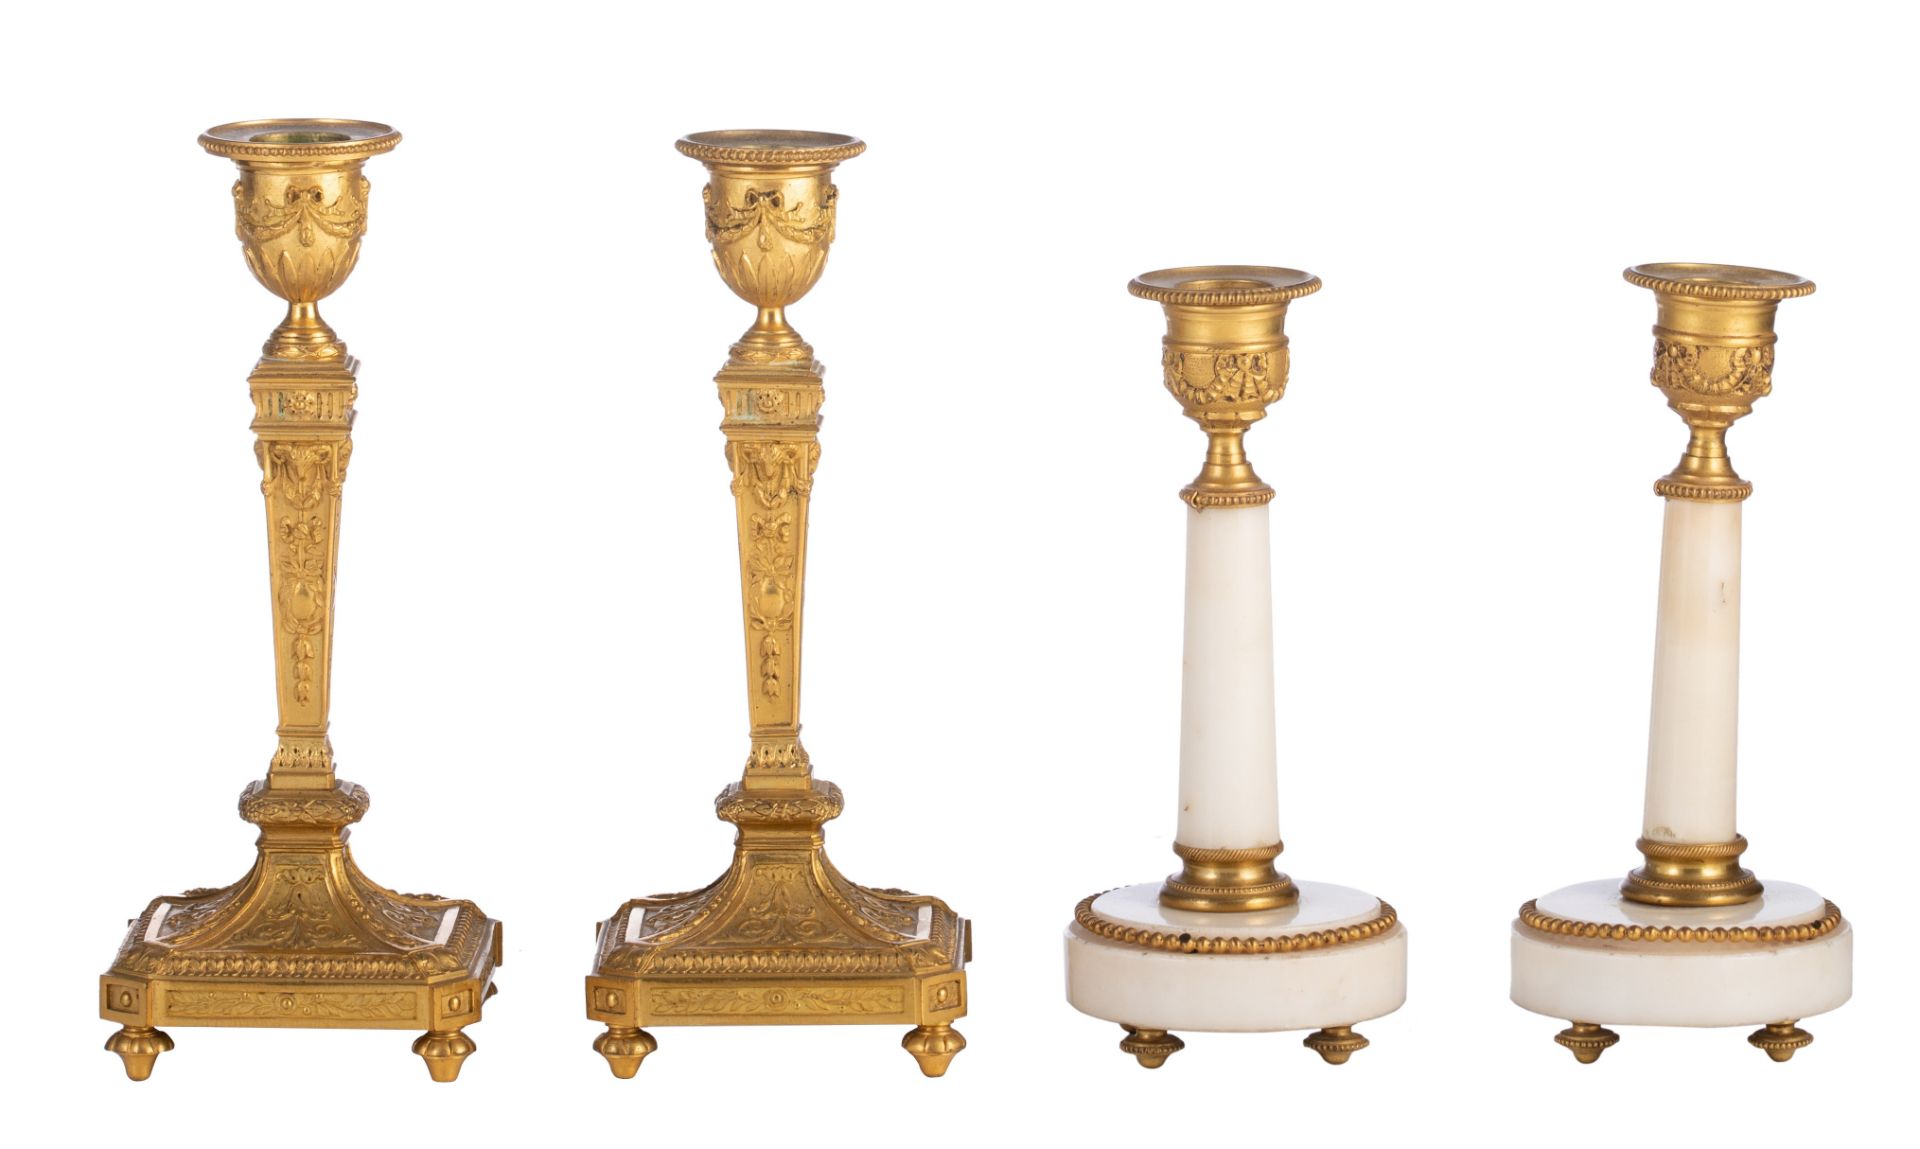 (BIDDING ONLY ON CARLOBONTE.BE) Two pairs of Neoclassical candlesticks, H 17,5 - 21 cm